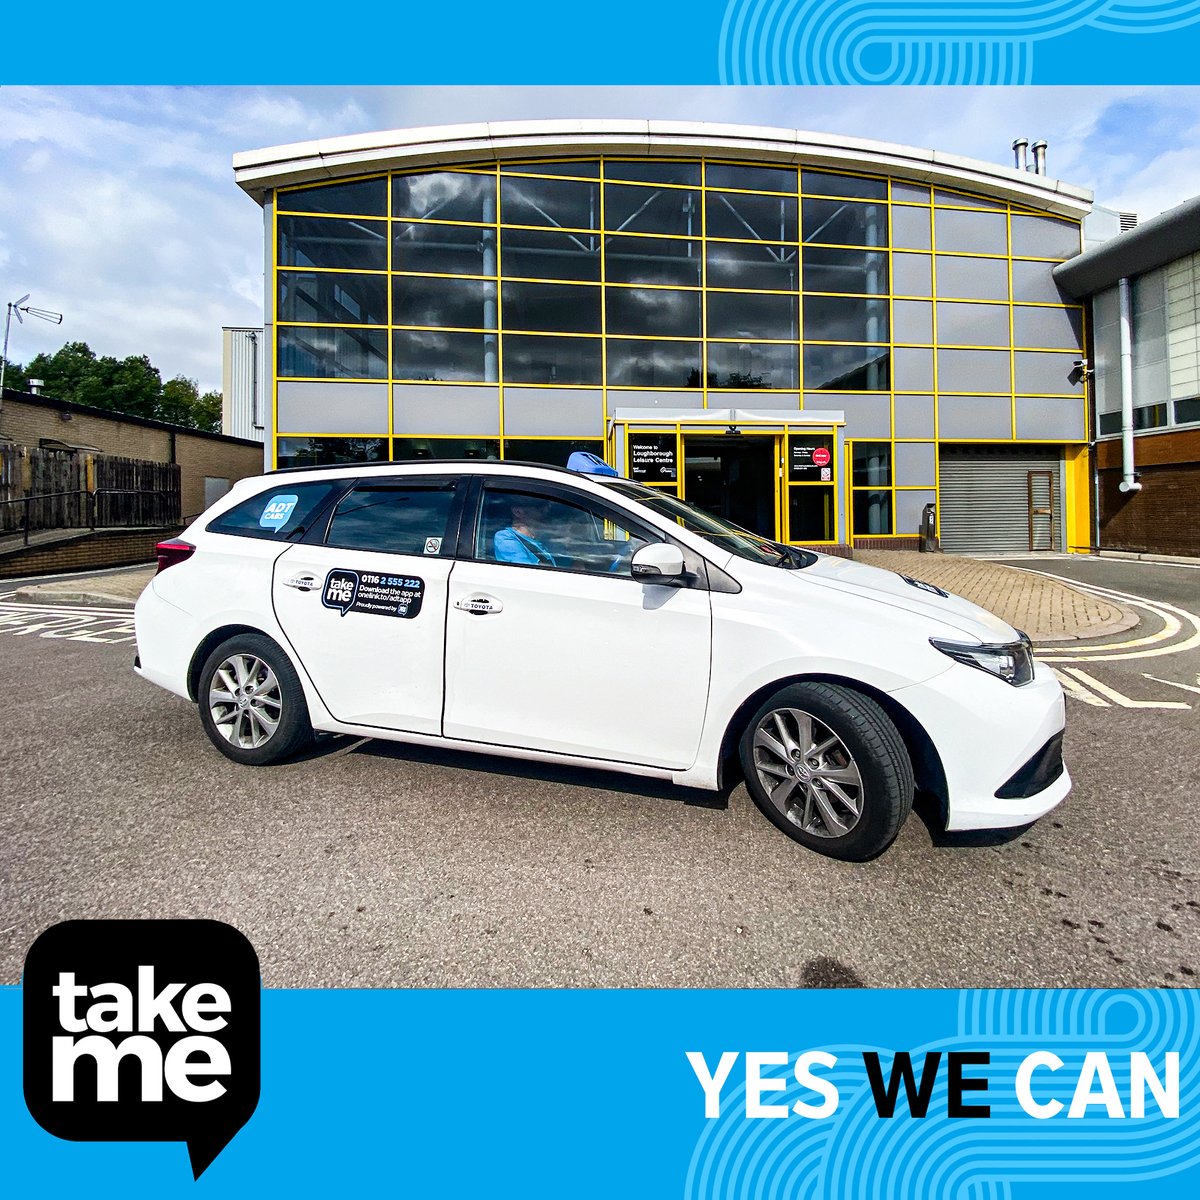 Need a ride to the Leisure Centre... Download our app and pre book a ride takeme.taxi/app/ #TakeMe #Leicester #Loughborough #Ride